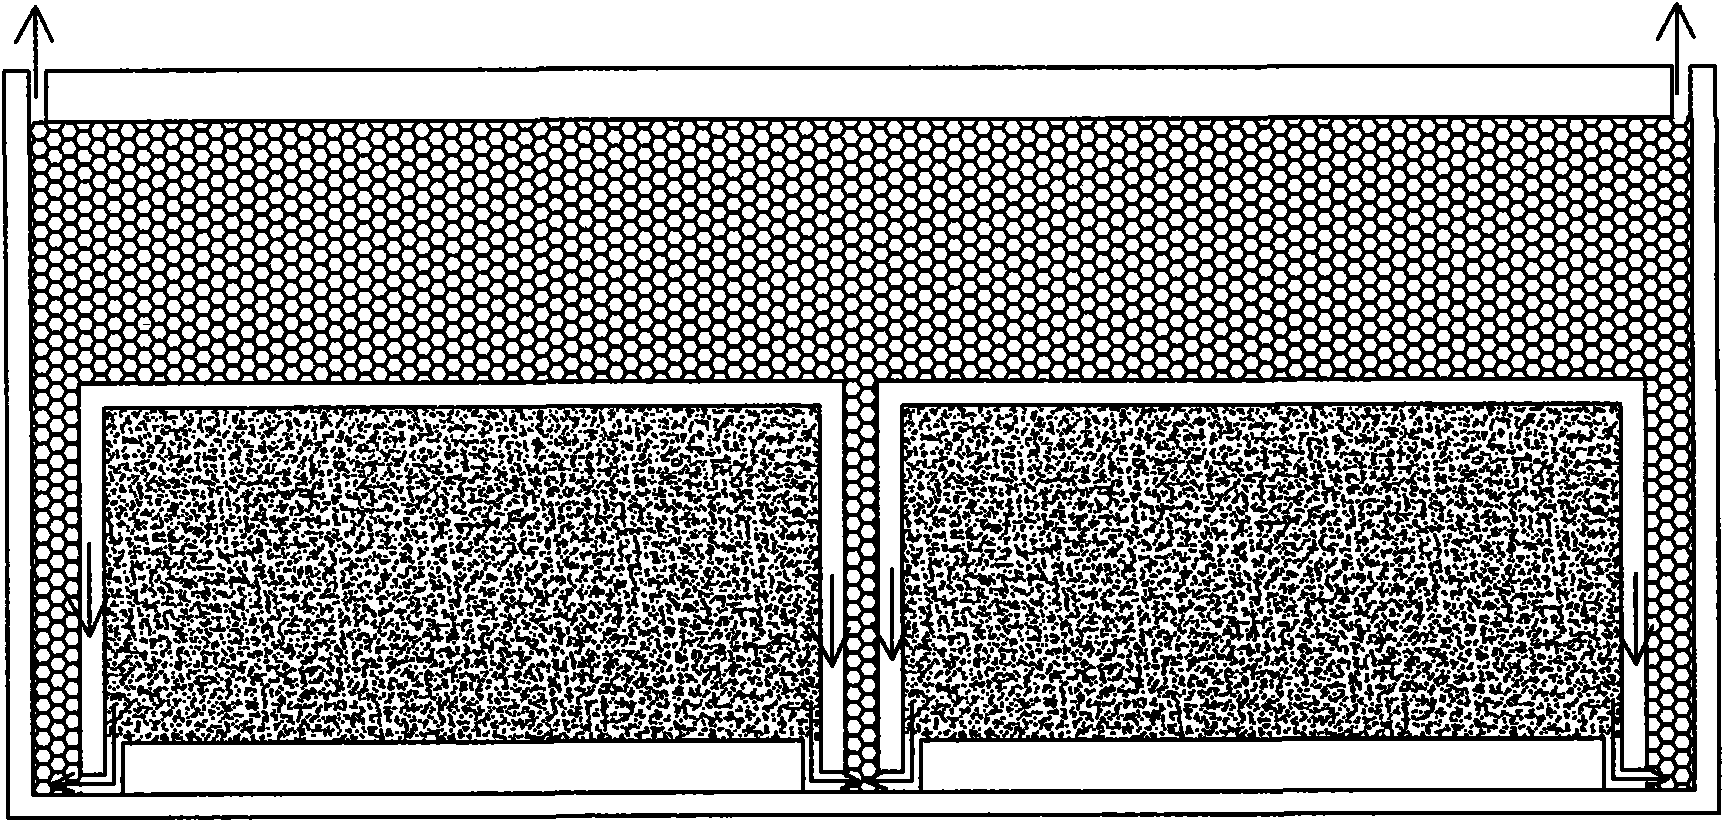 Method for producing lithium iron phosphate